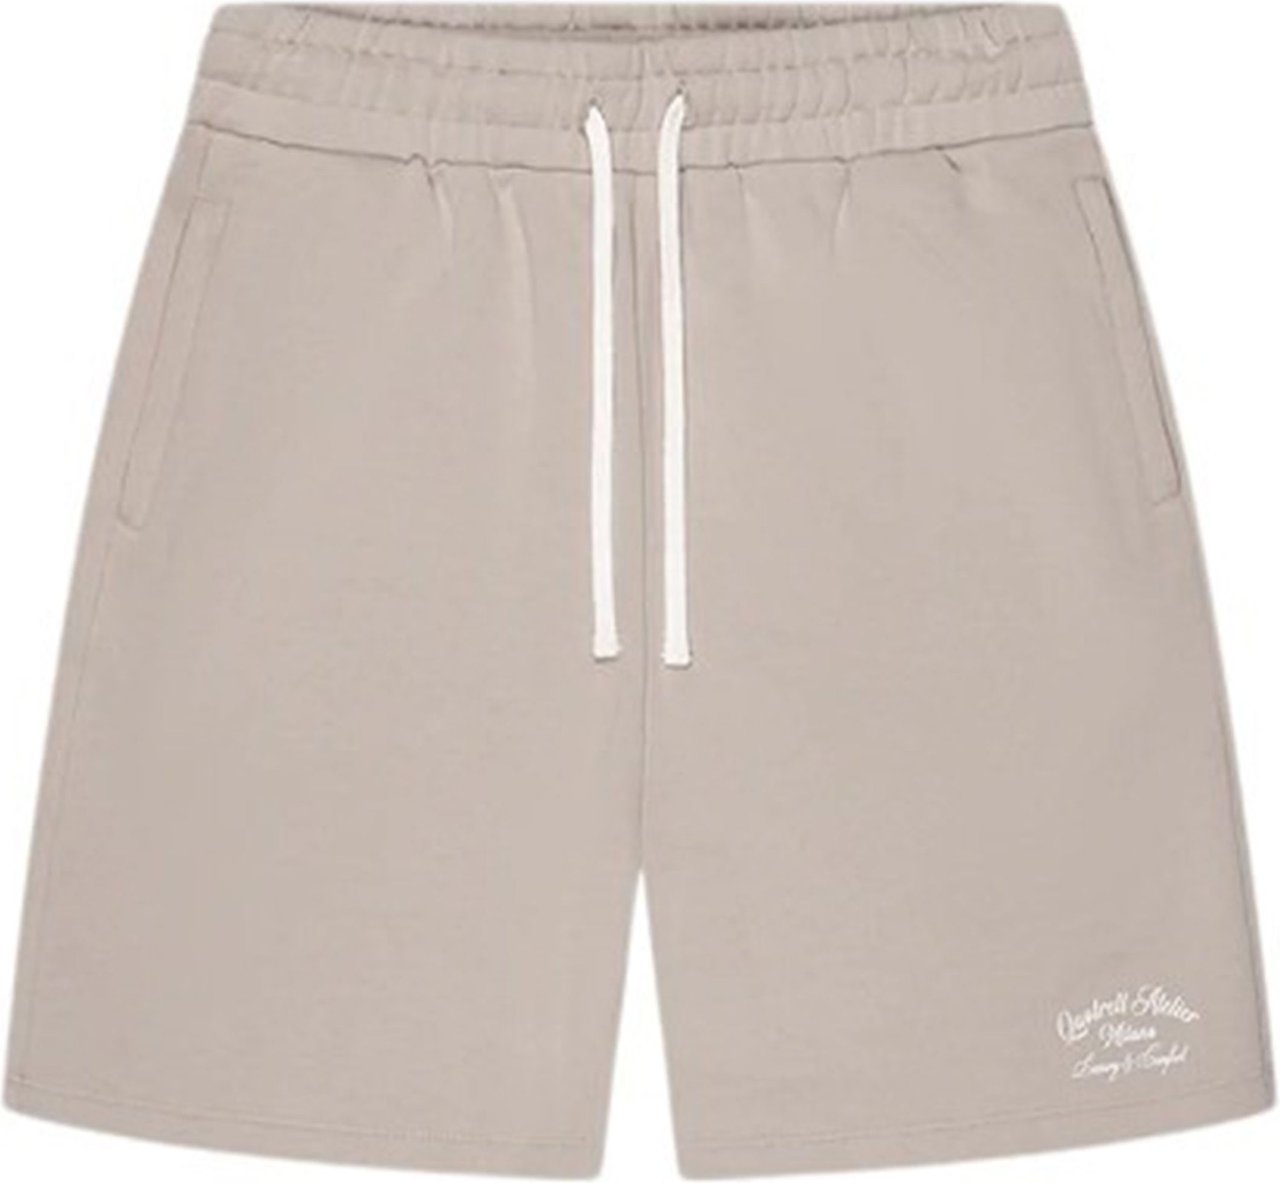 Quotrell Atelier Milano Shorts | Taupe/off White Taupe